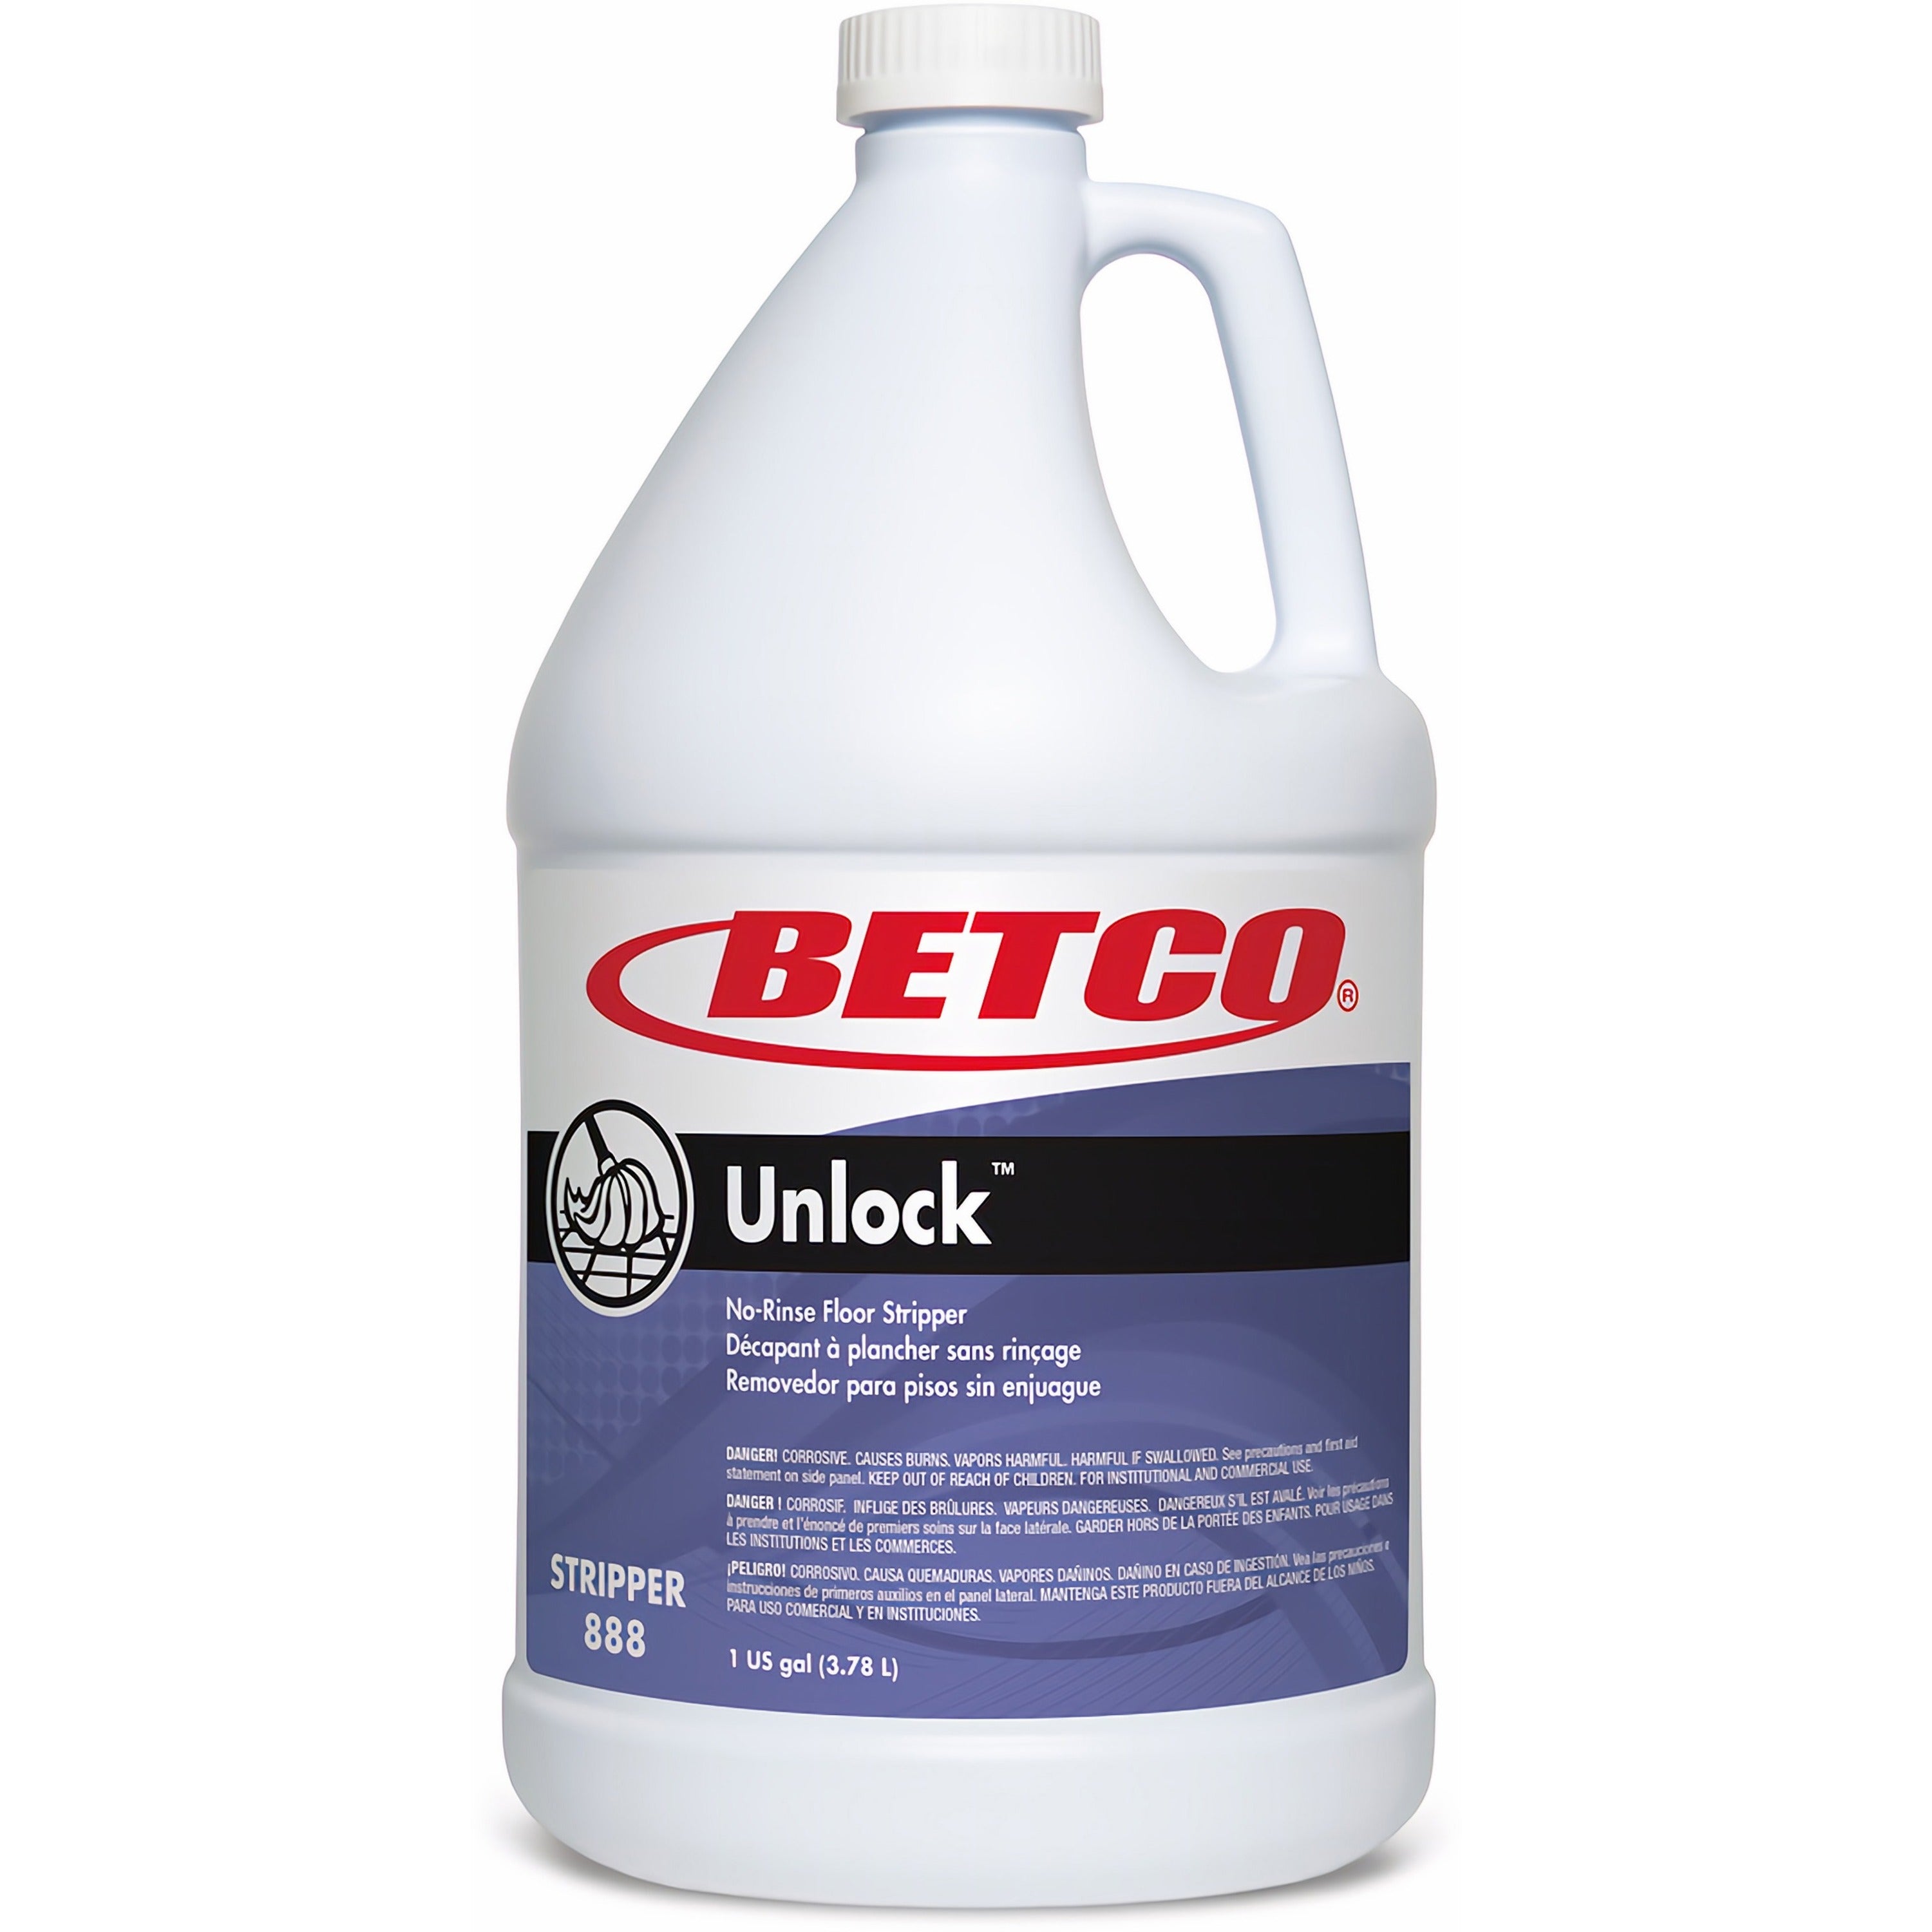 betco-unlock-floor-stripper-1-gallon-pack-of-4-ready-to-use-128-fl-oz-4-quart-128-oz-8-lb-4-carton-unscented-low-foaming-rinse-free-low-odor-clear_bet8880400 - 1